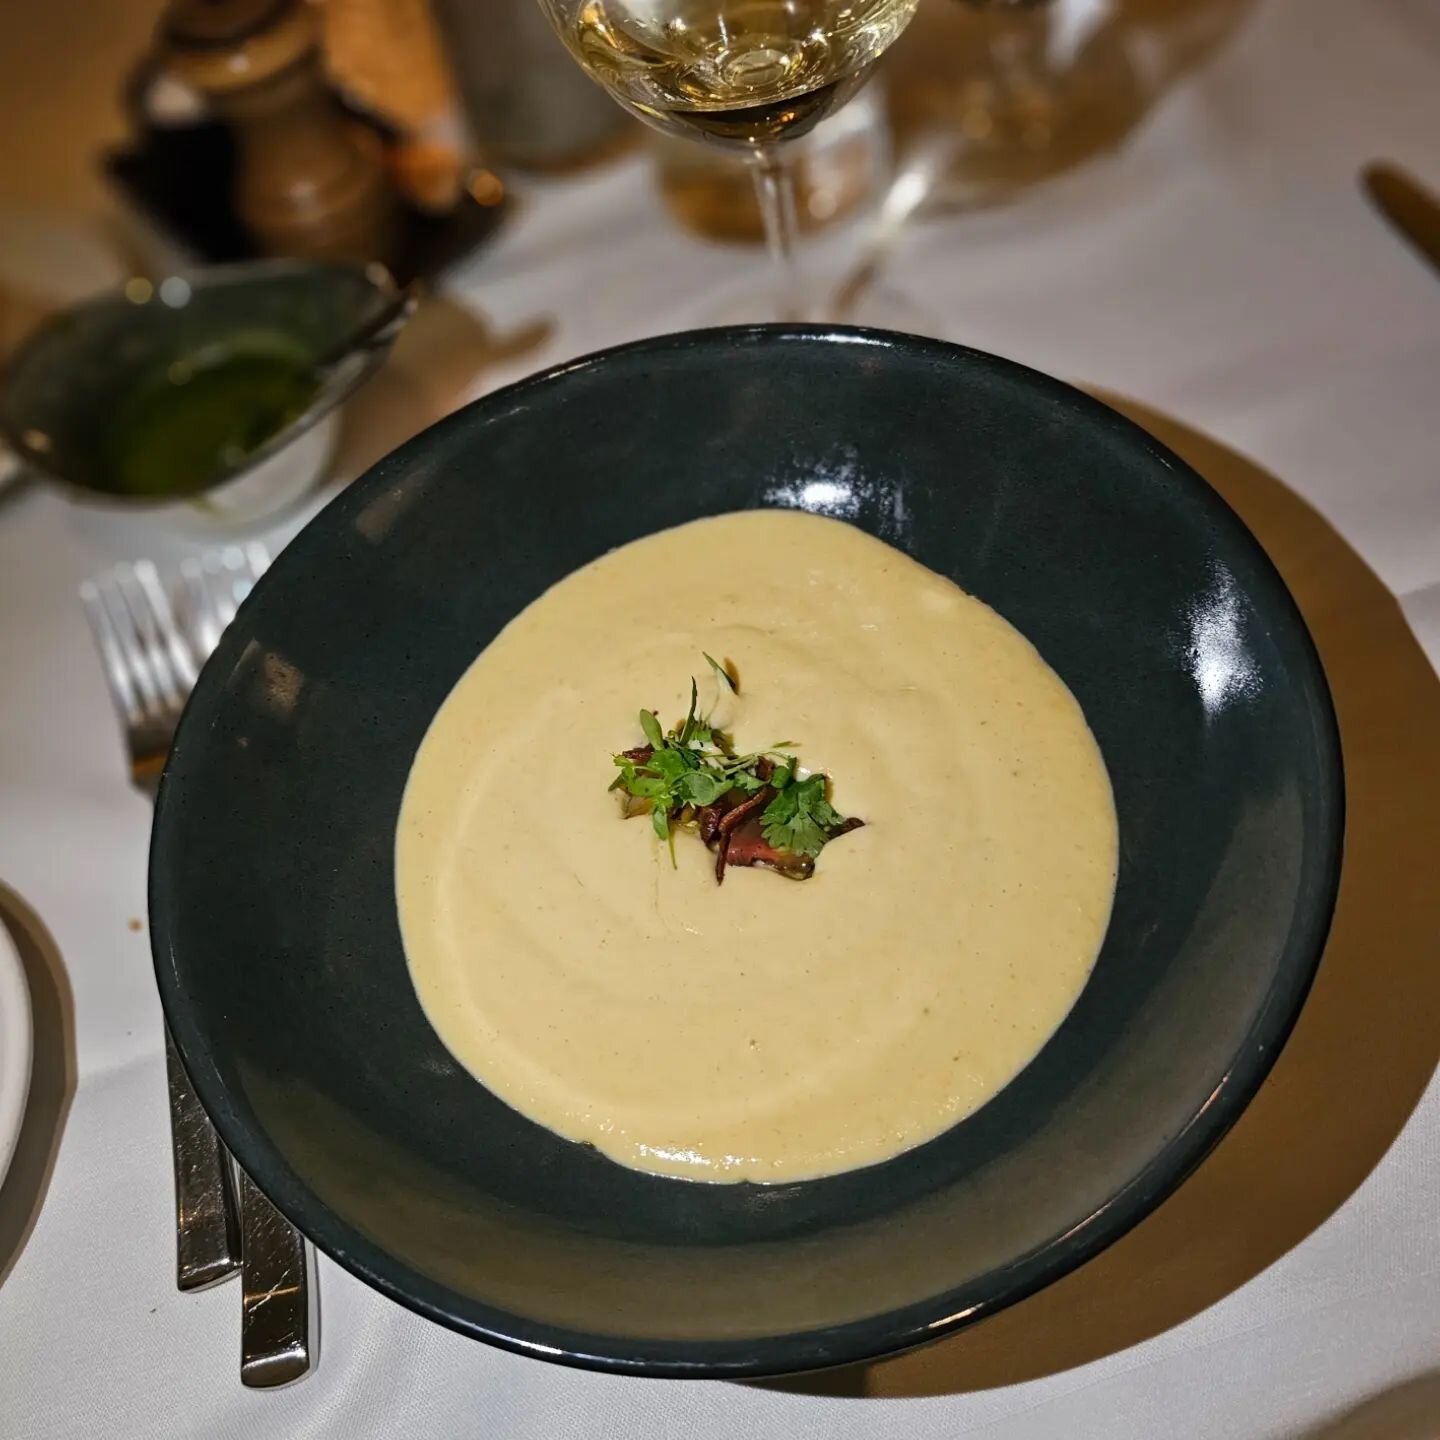 Spring @azrestaurant week launched today, and I started with a winner. If you're wondering where to go, try @hearth61 at @mountainshadowsaz. Paired with a half-bottle of Domaine Louis Michel, my choices were a velvety sweet corn soup with Spanish cho